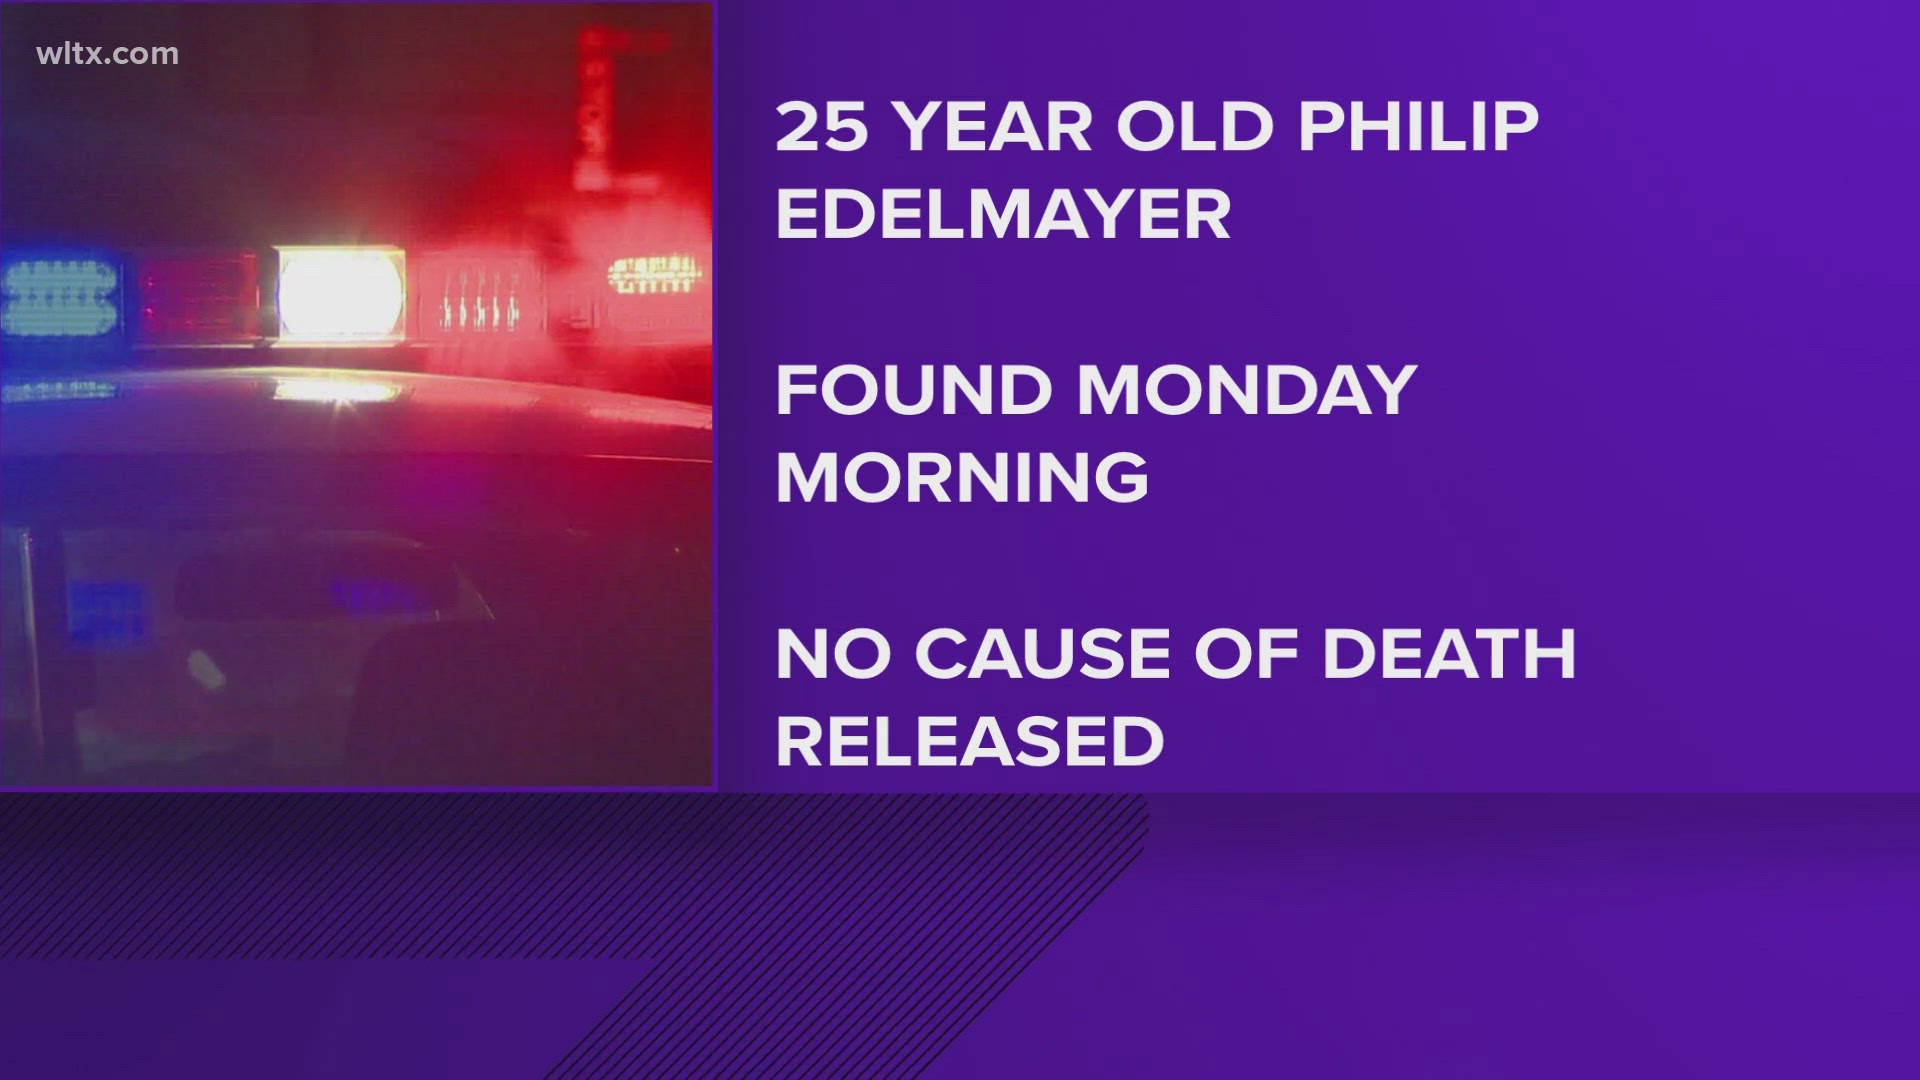 The Richland County coroner has identified the man as Philip Edelmayer, 25.